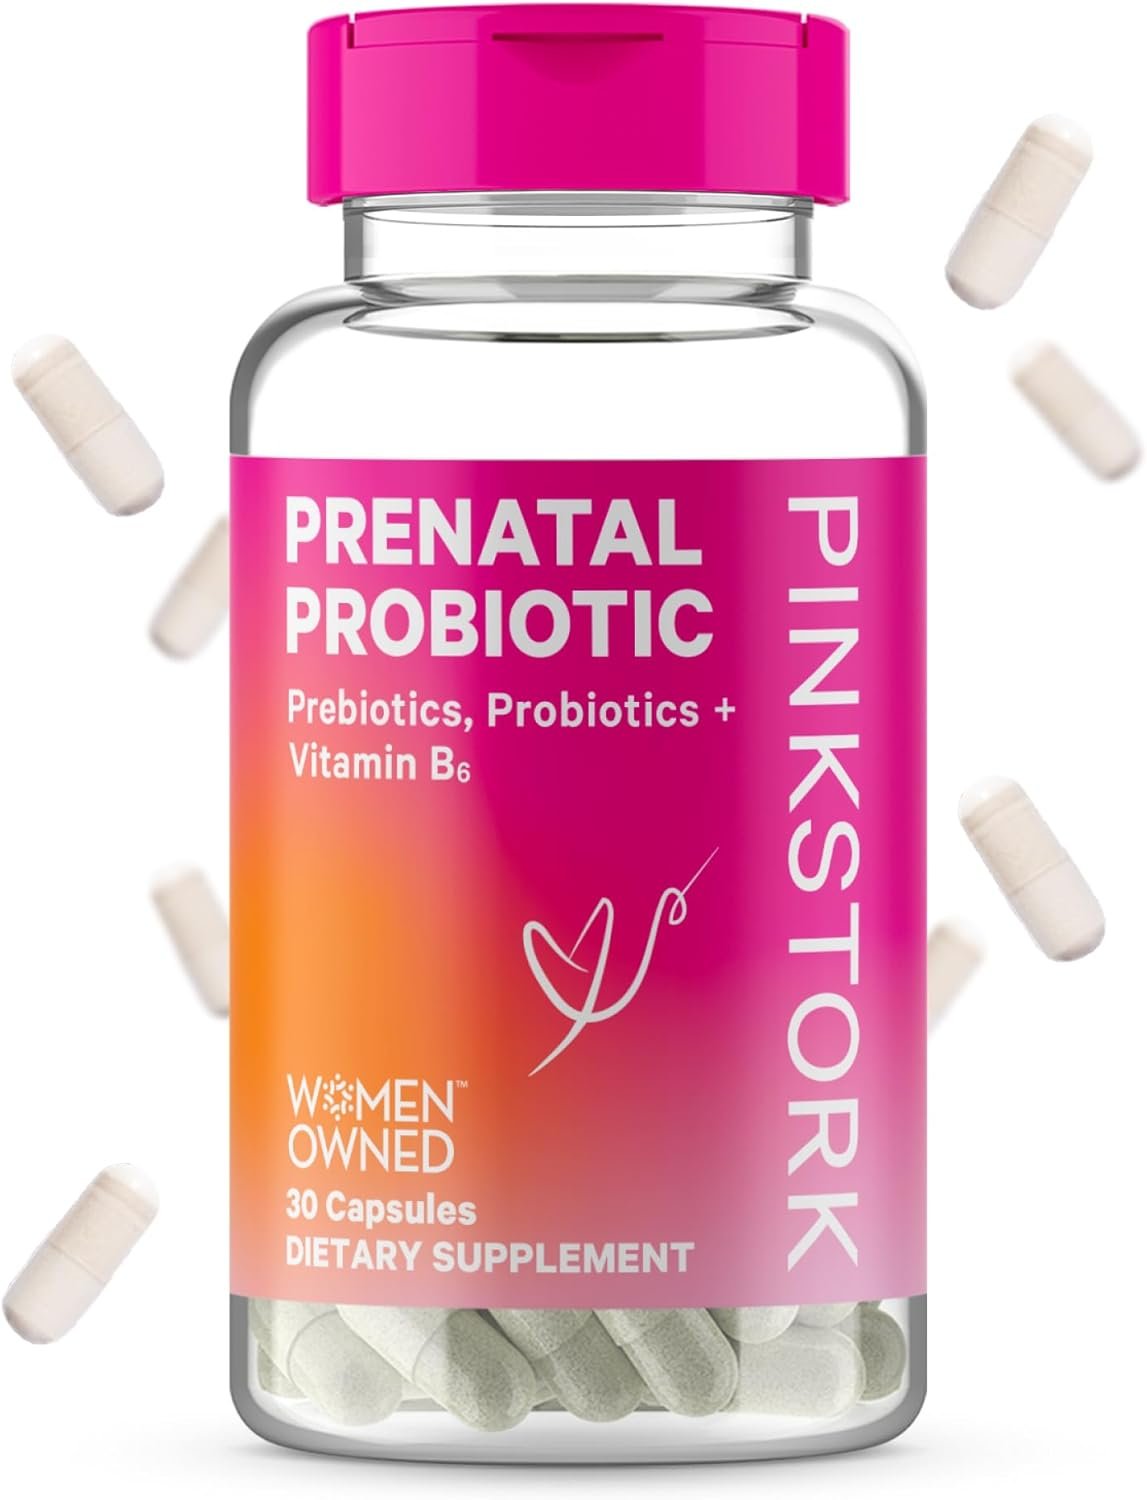 Pink Stork Prenatal Probiotics for Women, Pregnancy Probiotic with Prebiotics and Vitamin B6 for Morning Sickness, Digestion, and Gut Health - Pregnancy Must Haves, 30 Capsules